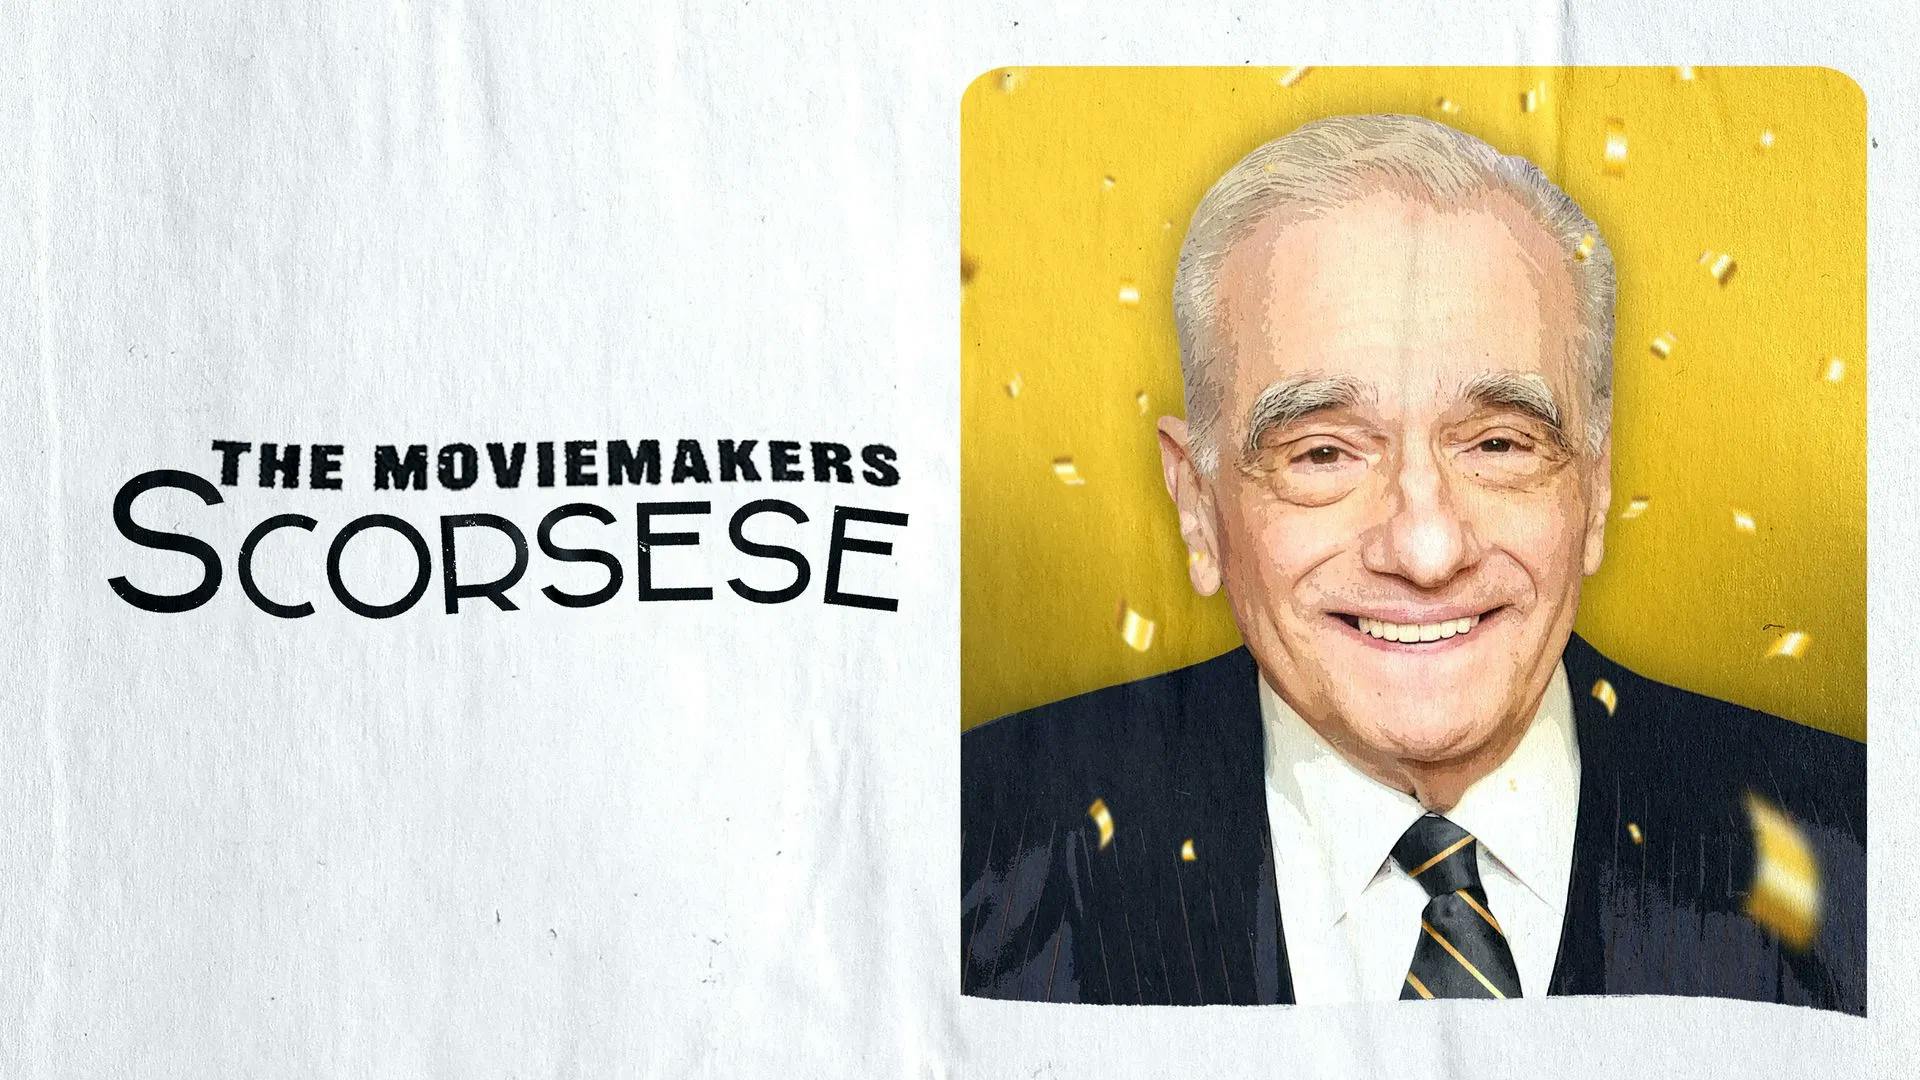 The Moviemakers: Scorsese